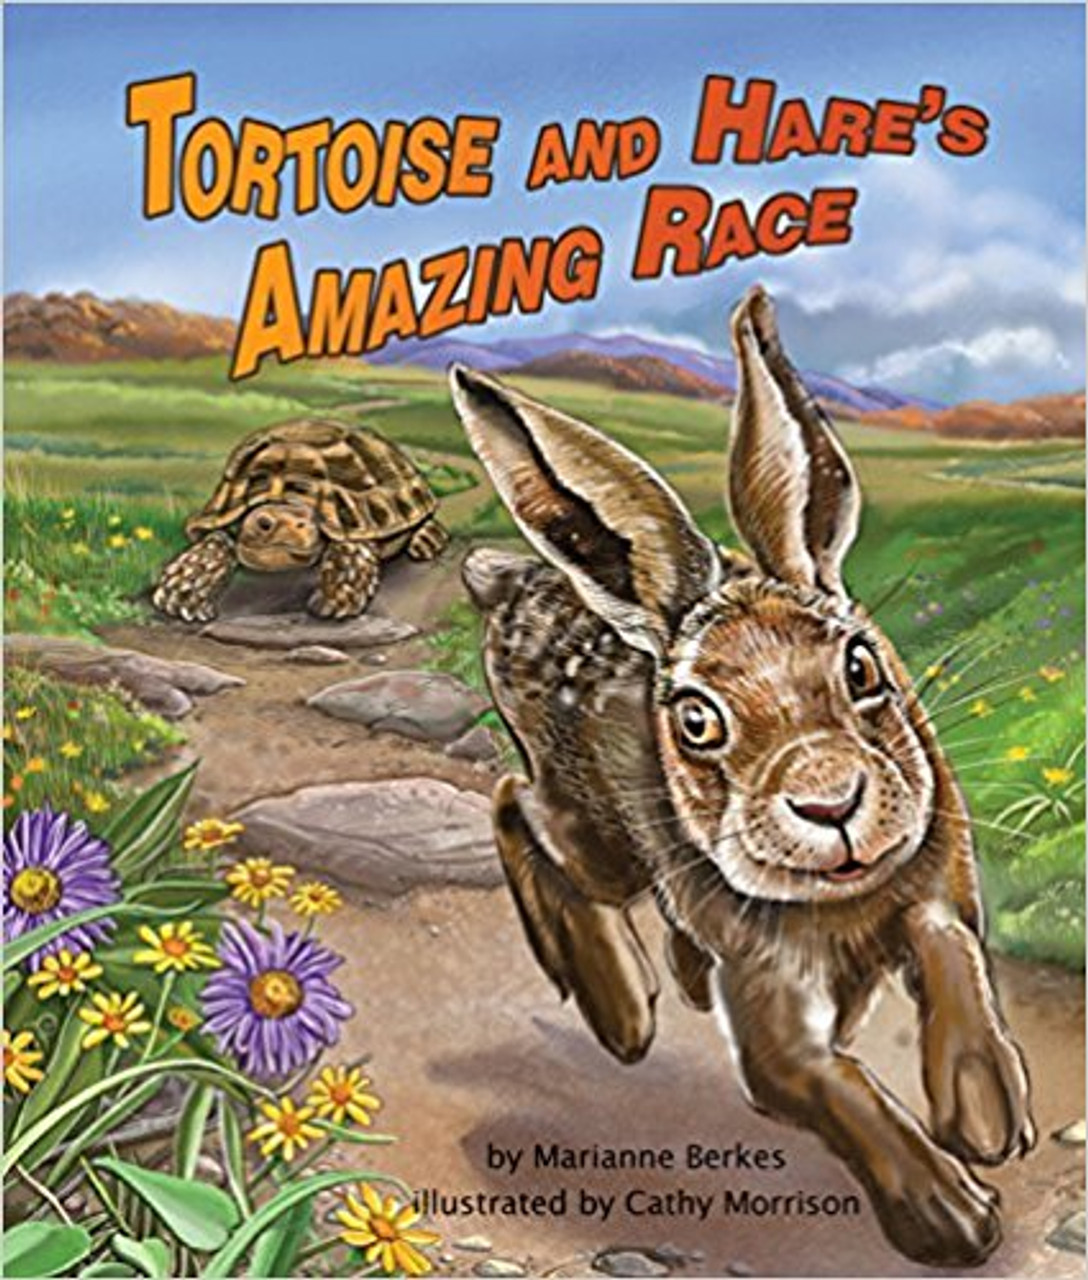 Tortoise and Hare's Amazing Race by Marianne Collins Berkes